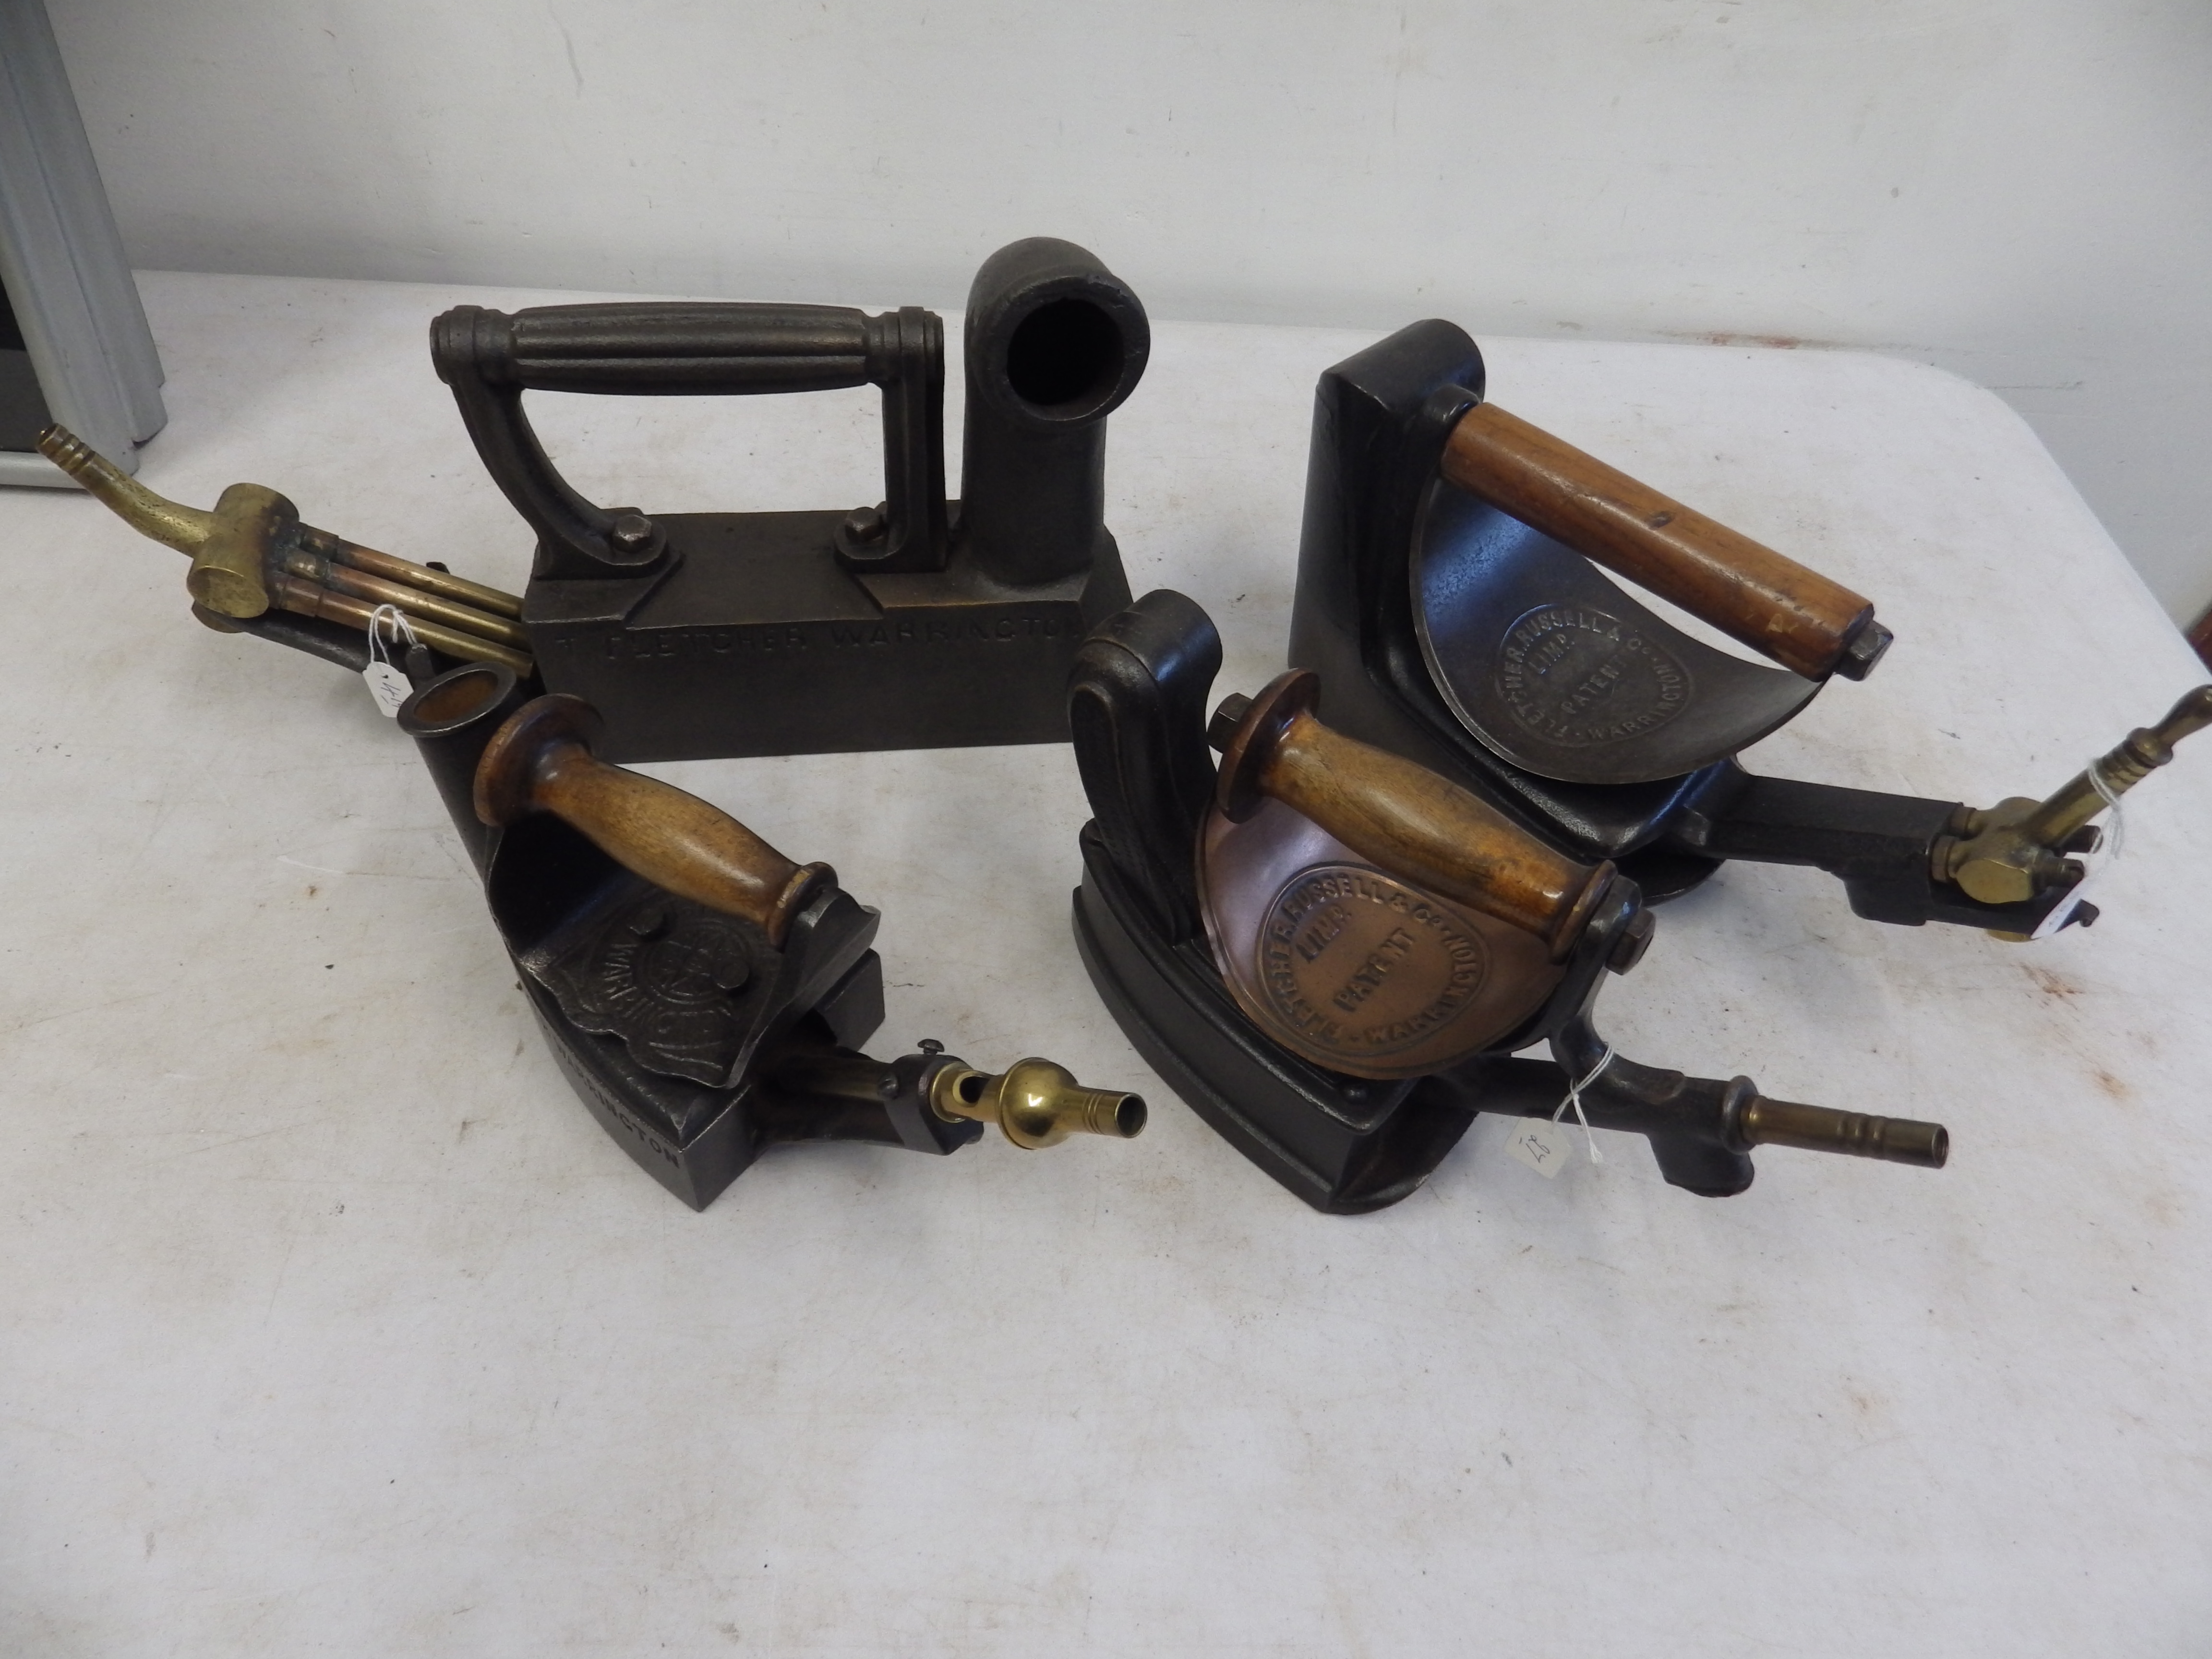 4 Fletcher Russell & Co Ltd gas irons to incl no.5 patent 1885, No.10, another with air vent down